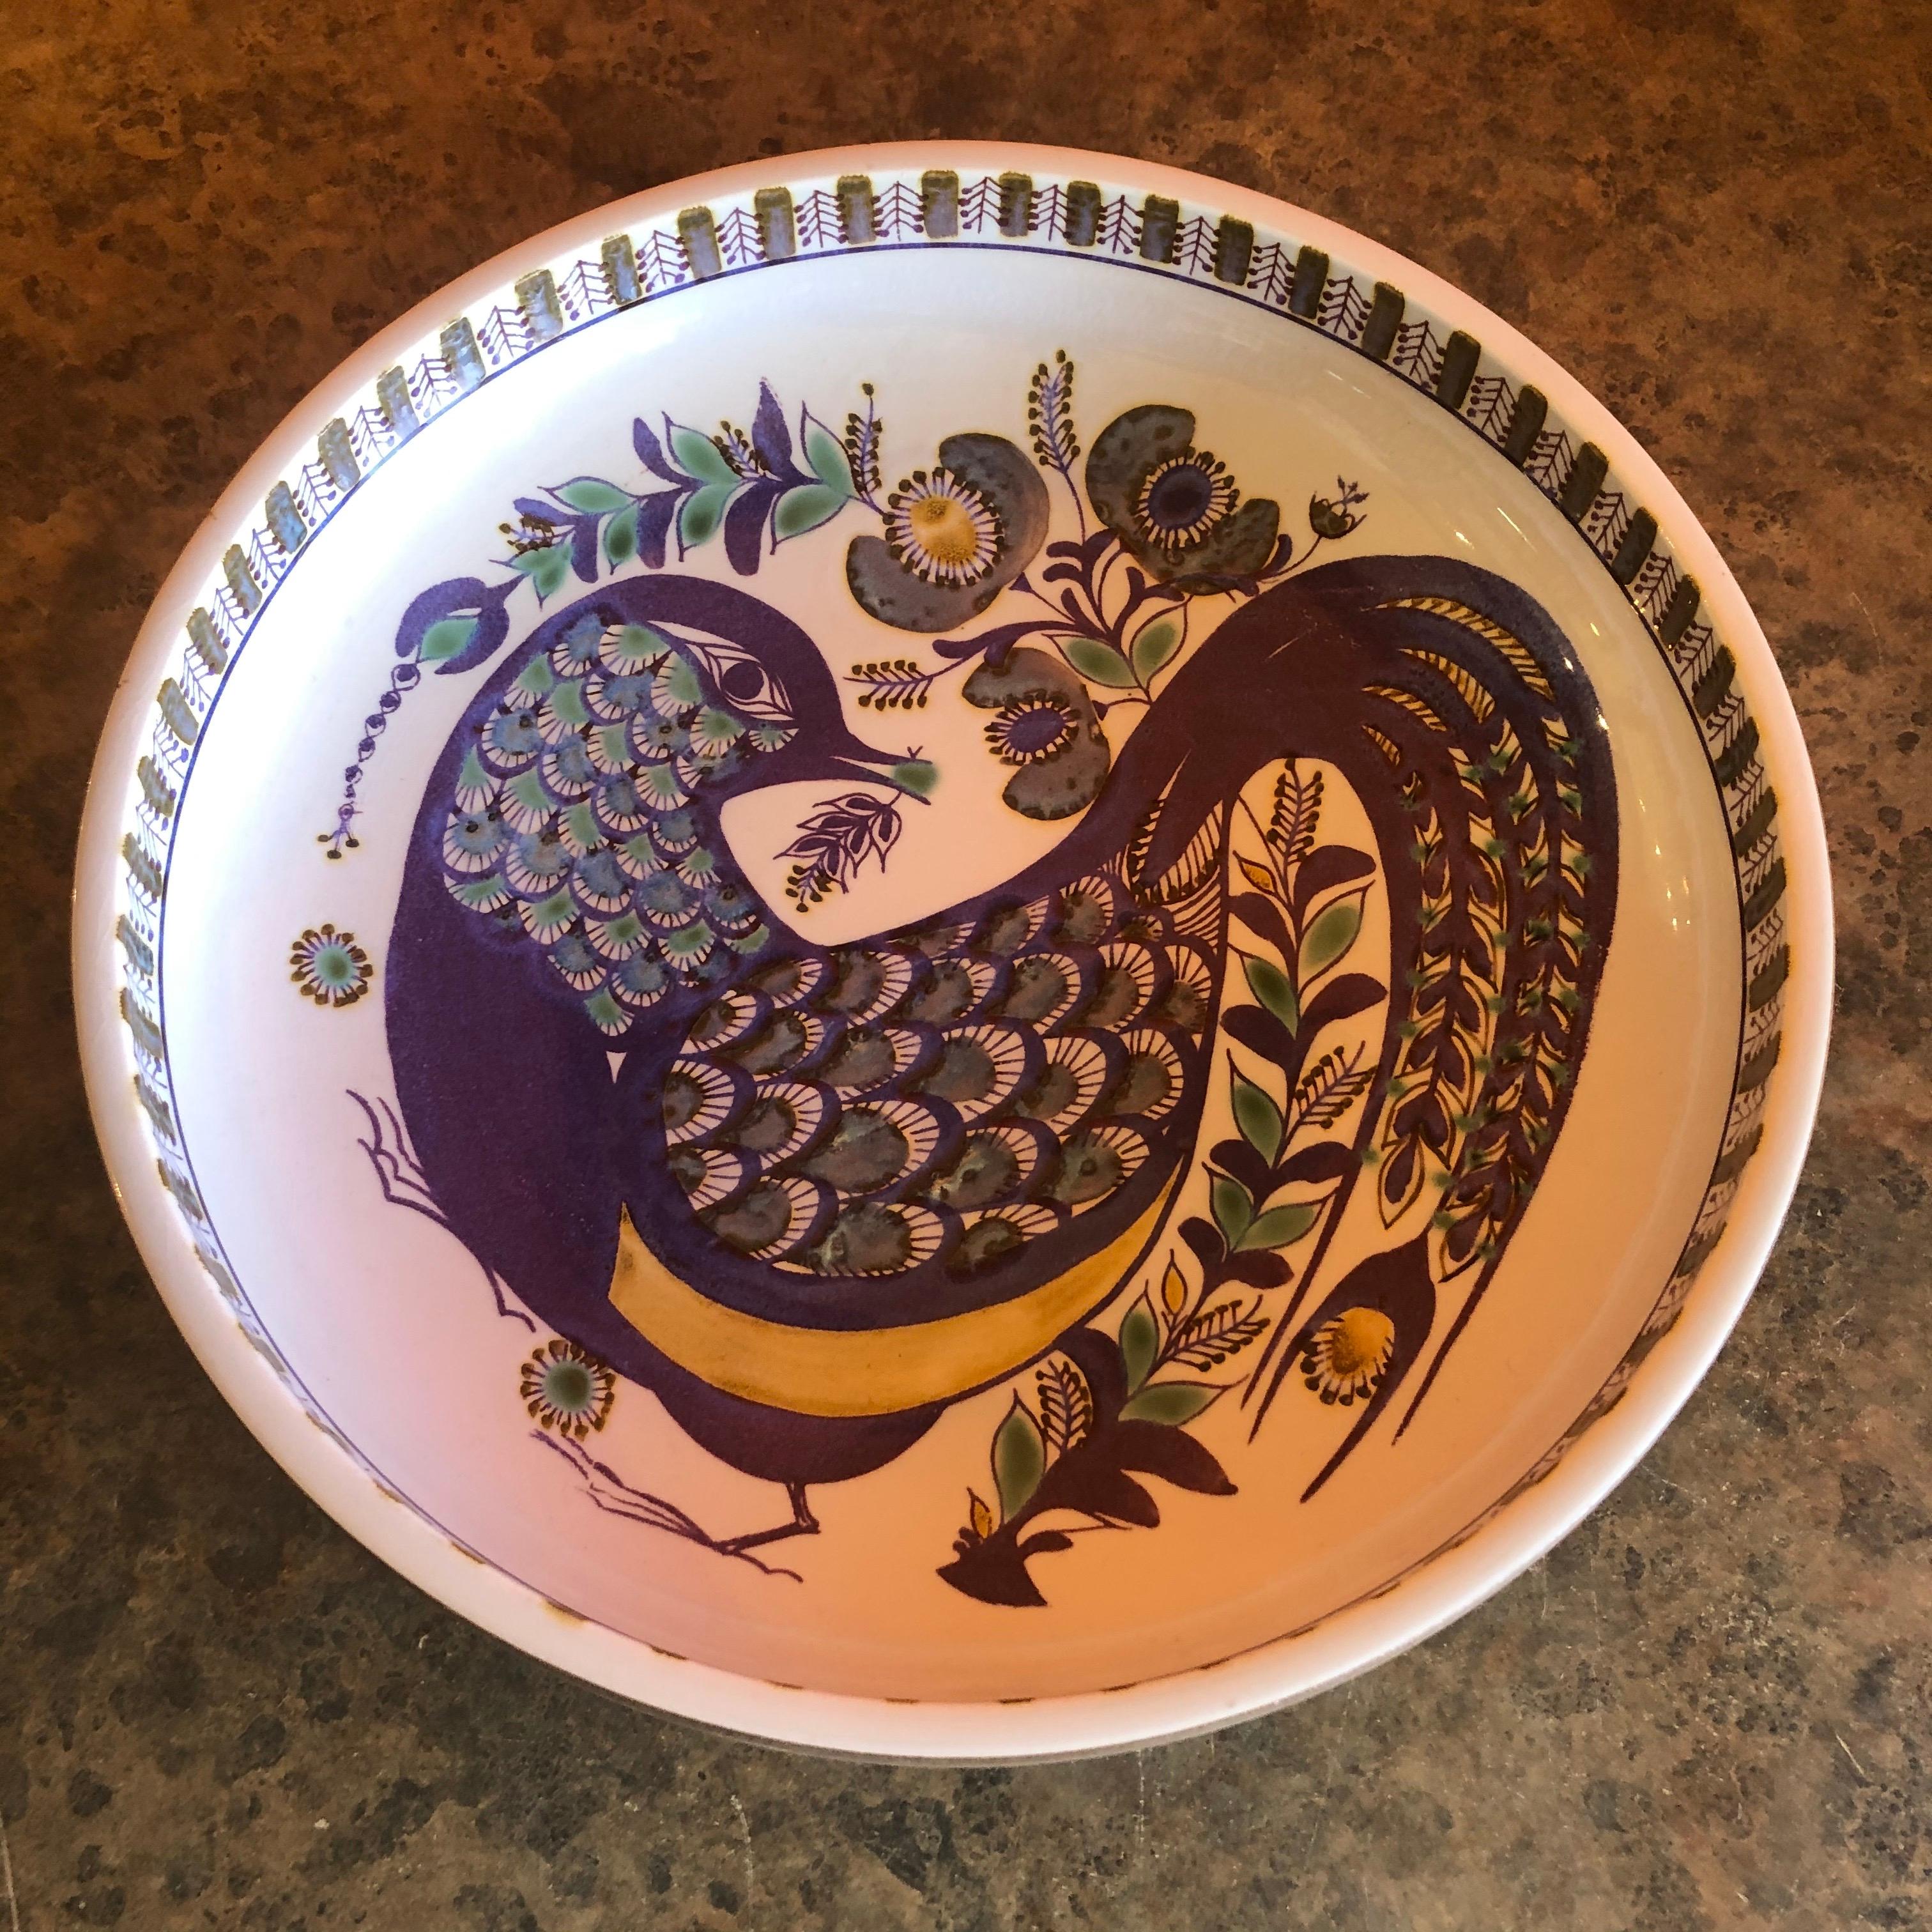 Wonderful large Tenera bowl by Berte Jessen for Royal Copenhagen, circa 1960s. The purple, grey and white glazed stoneware bowl with geometric abstract design around a bird in the center is signed and marked accordingly (440/3177).

The patterns